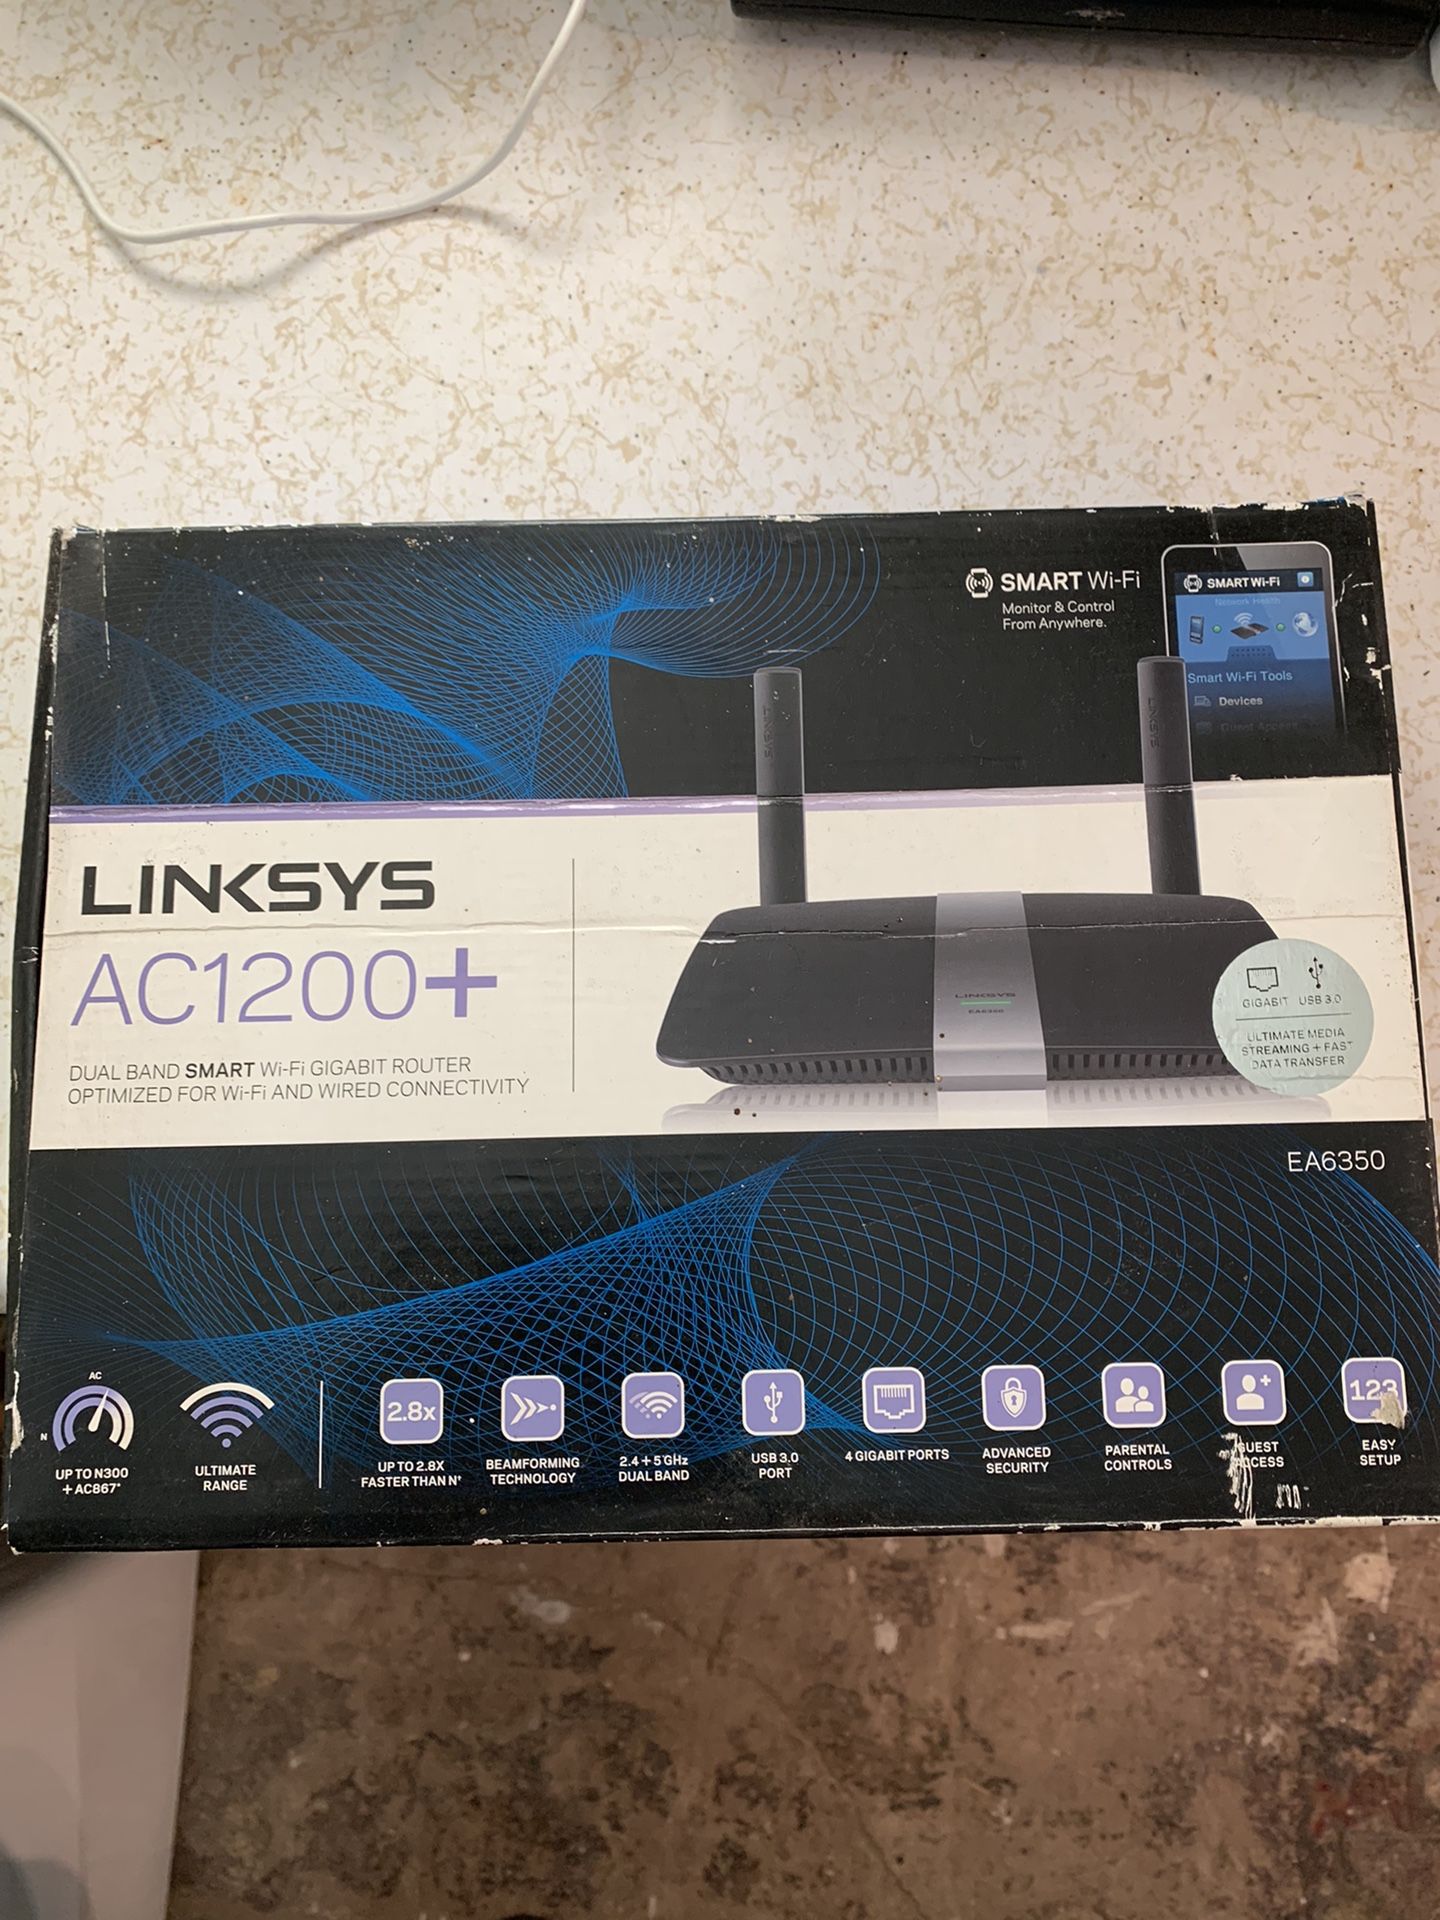 Linksys AC1200+ Wi-Fi Router